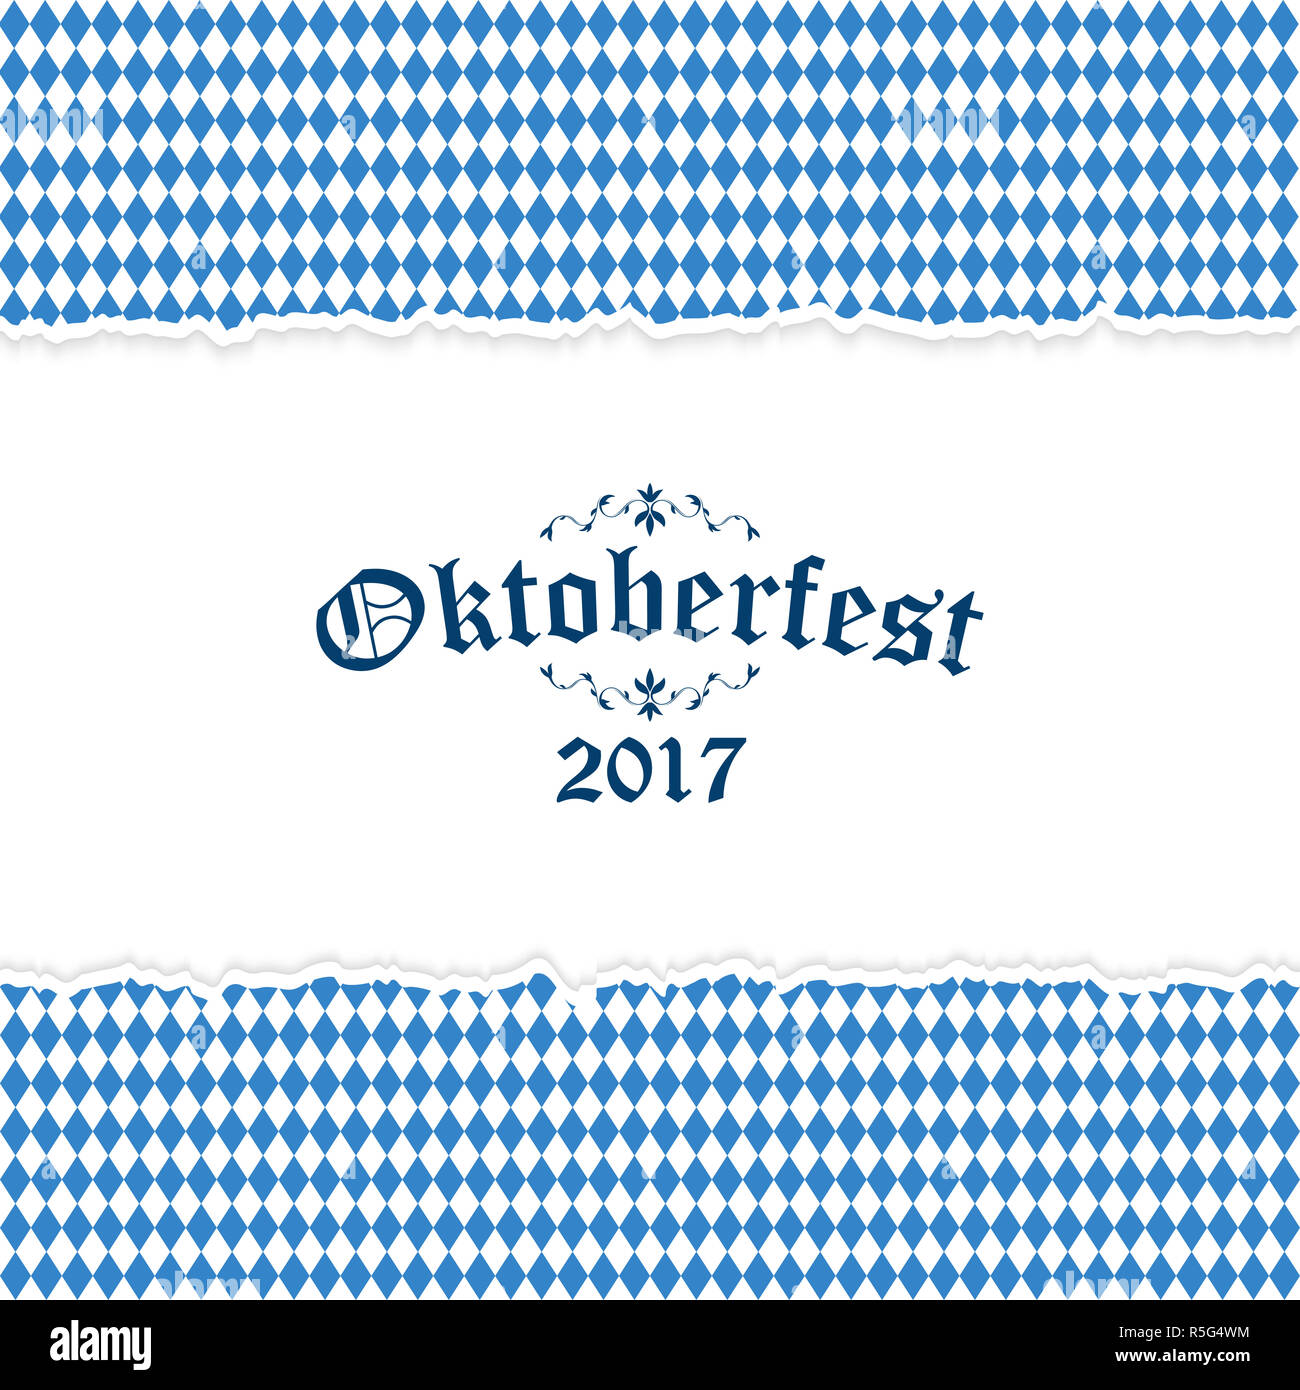 oktoberfest 2017 background with ripped paper Stock Photo